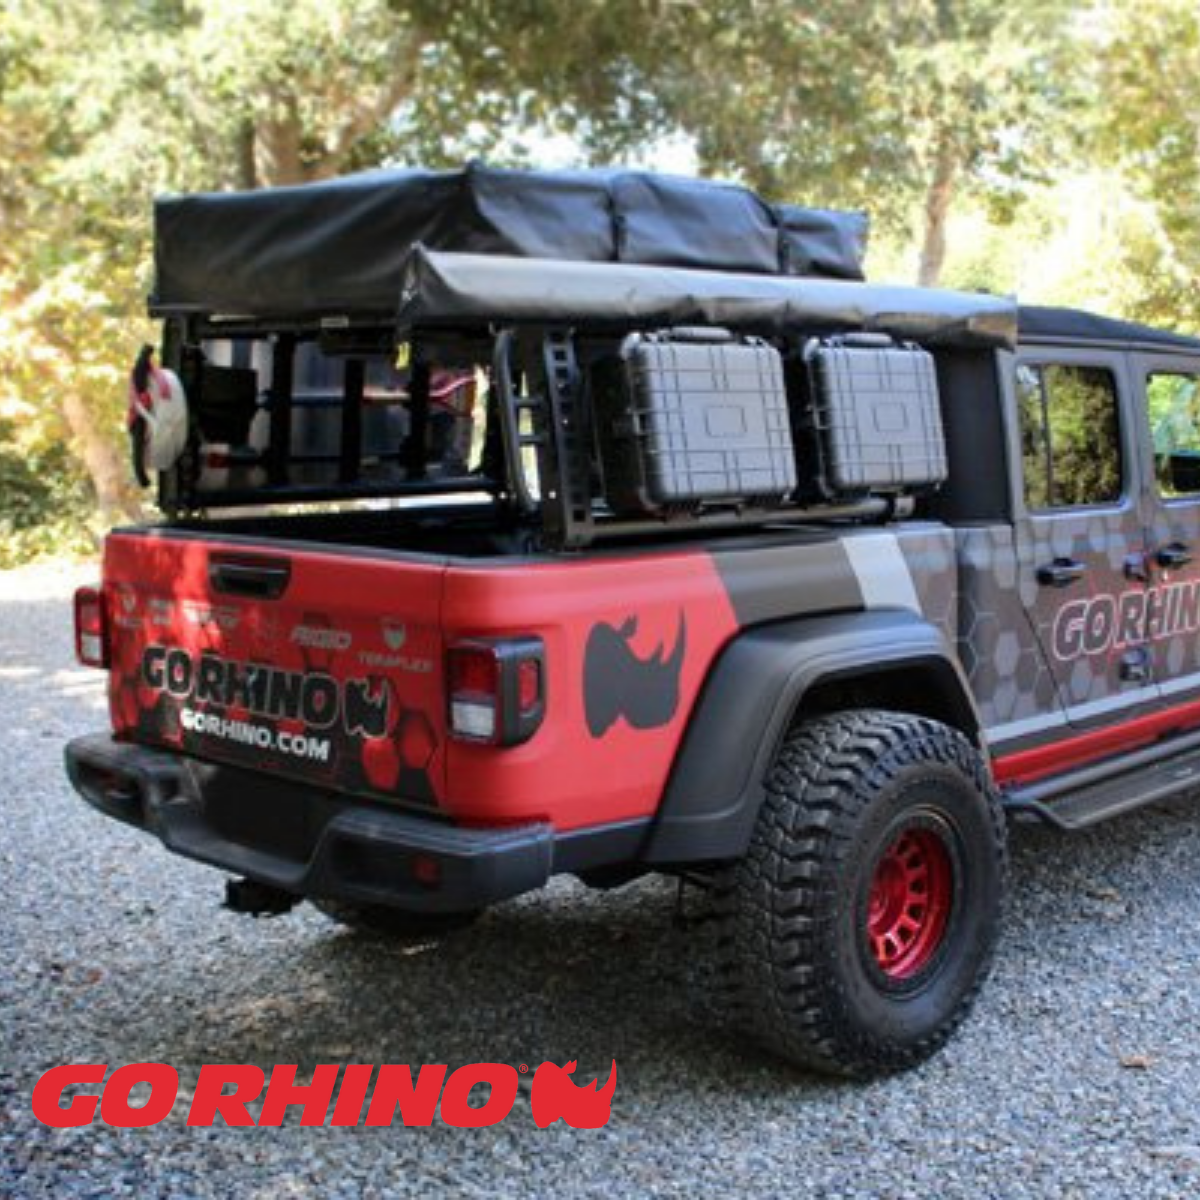 Haul More With Go Rhino's Roof Rack